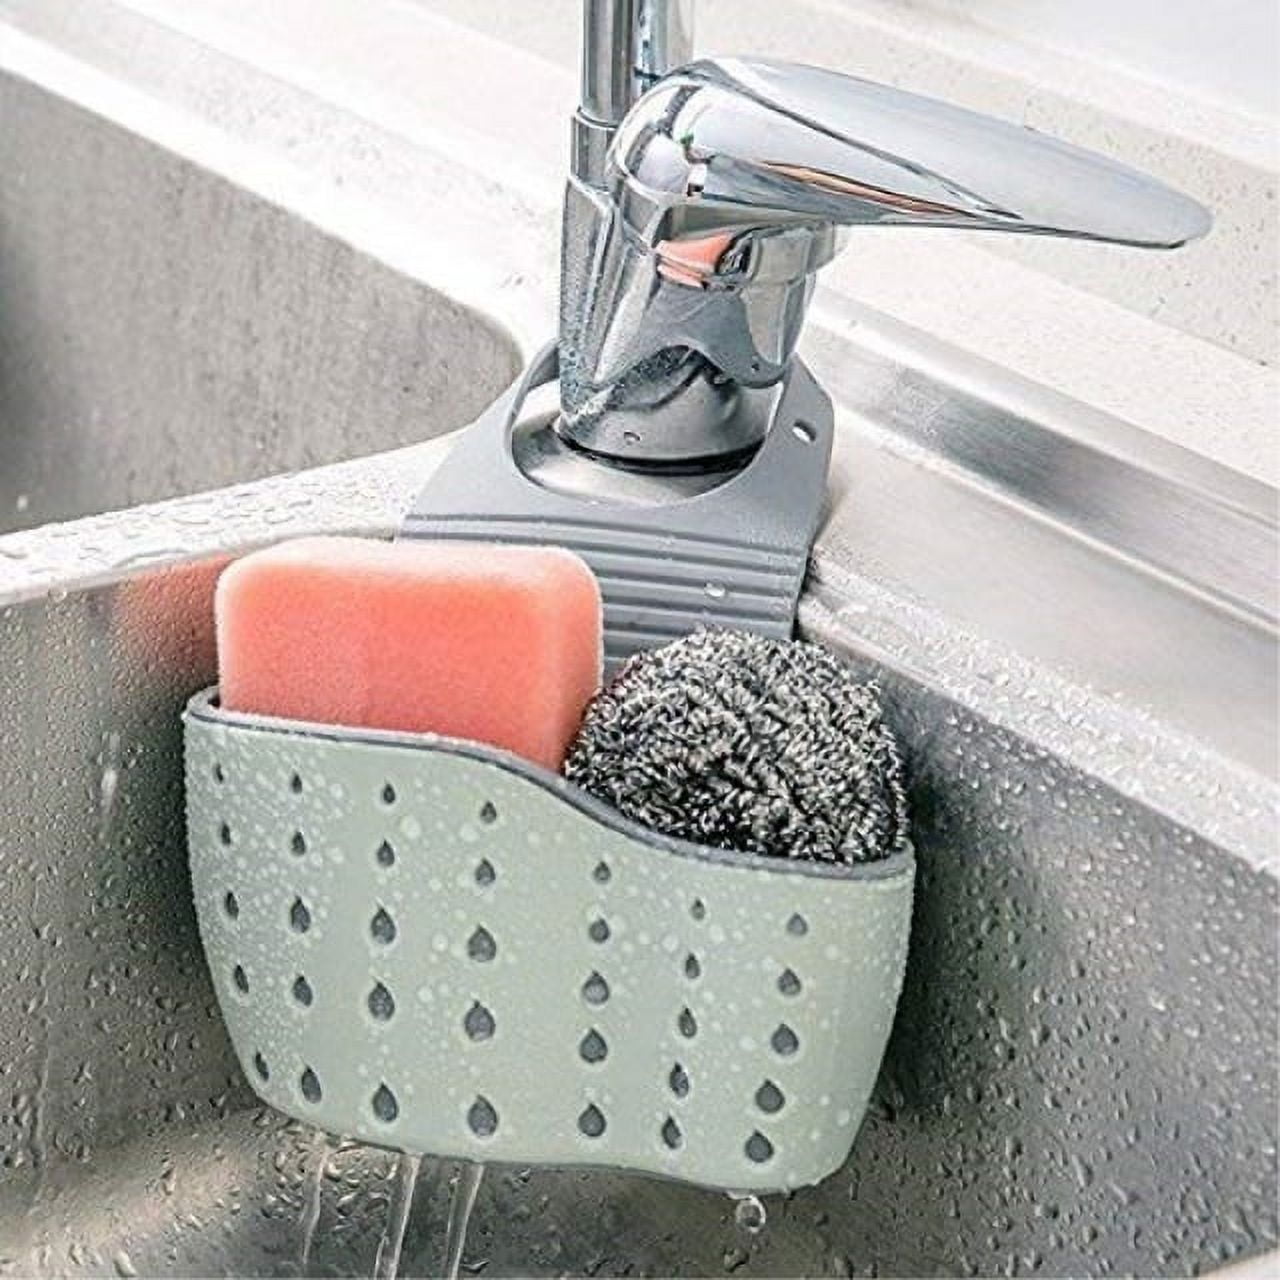 Dropship Kitchen Dish Cleaning Brushes Automatic Soap Liquid